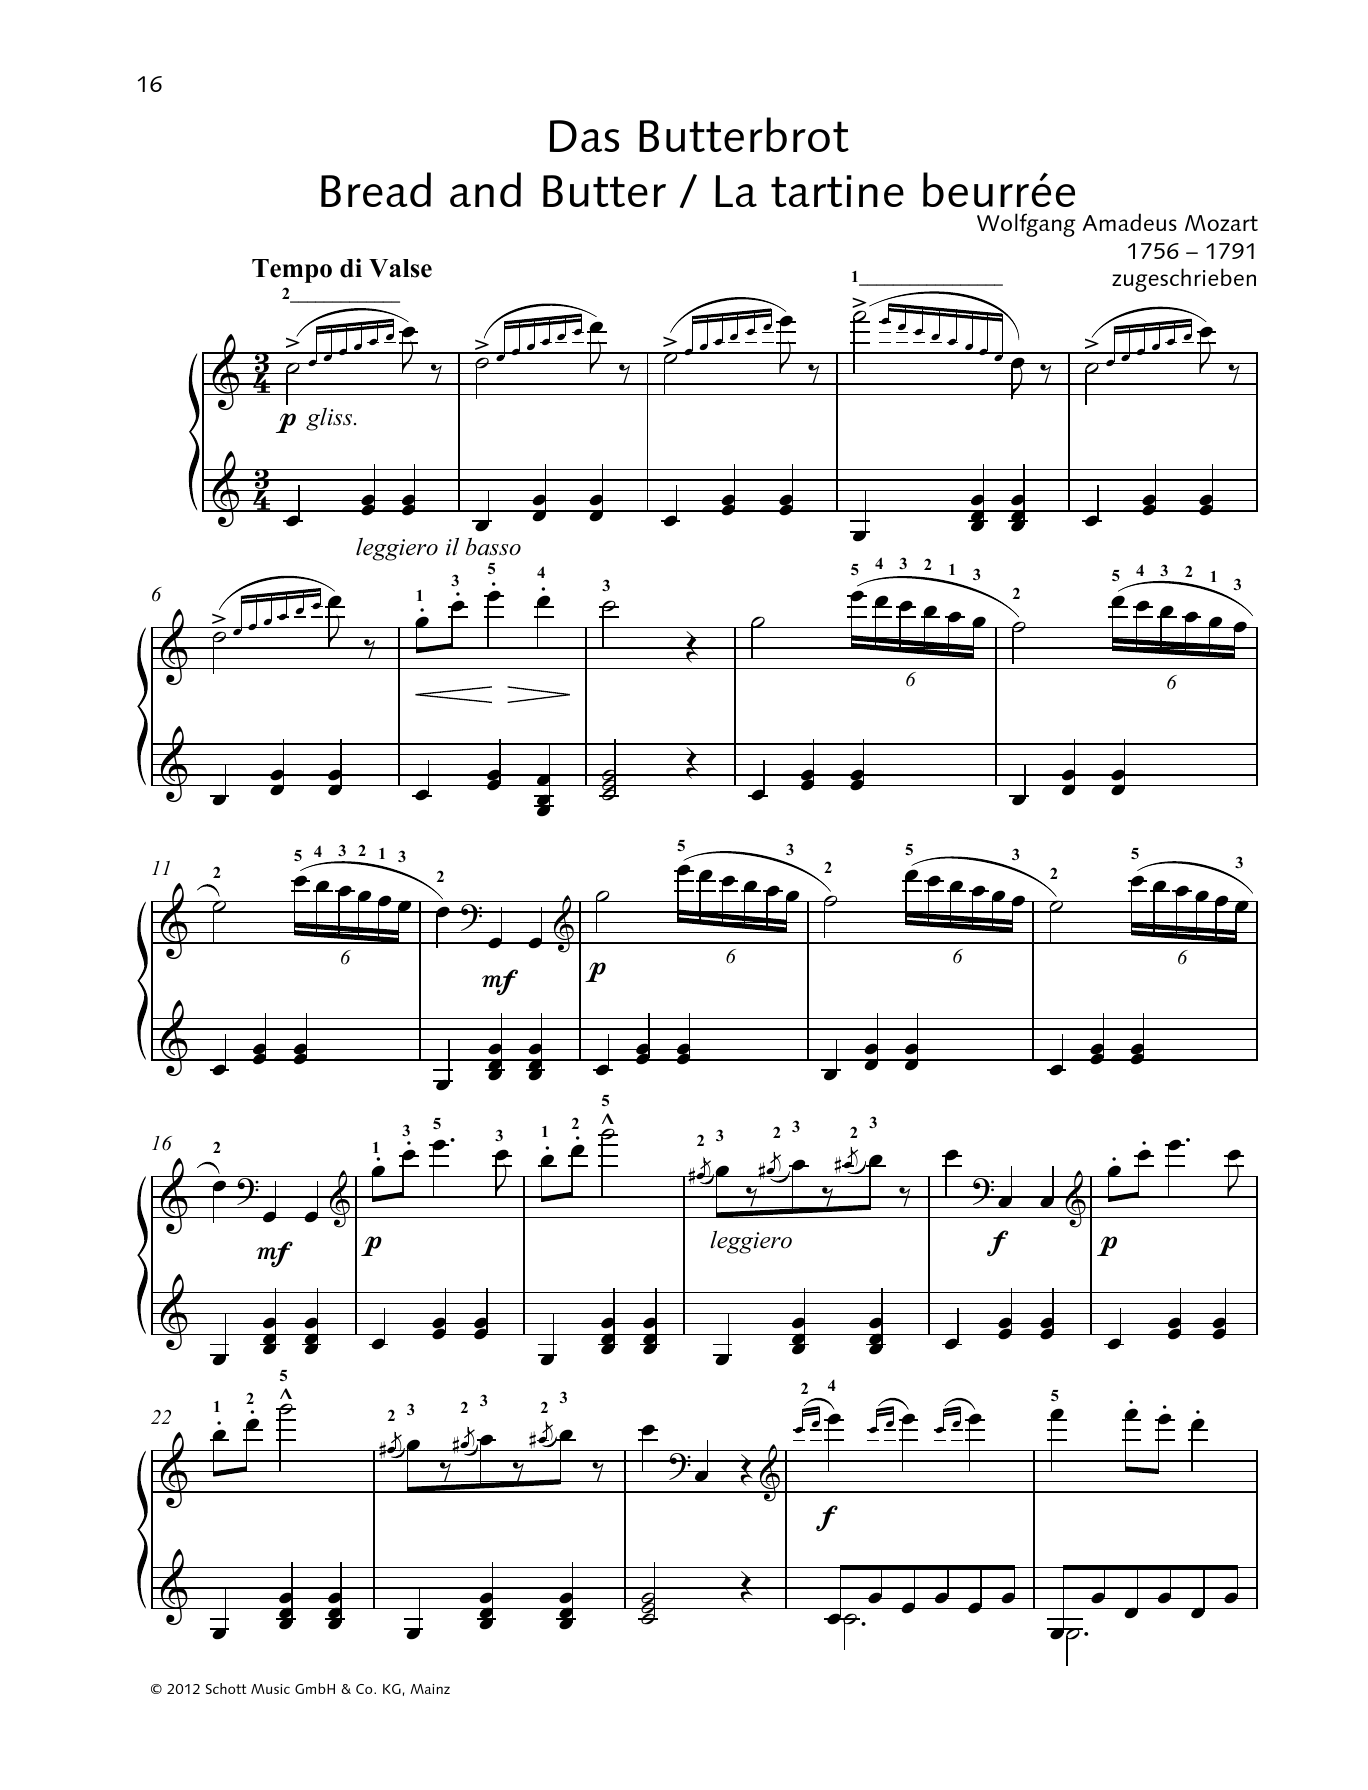 Download Wolfgang Amadeus Mozart Bread and Butter Sheet Music